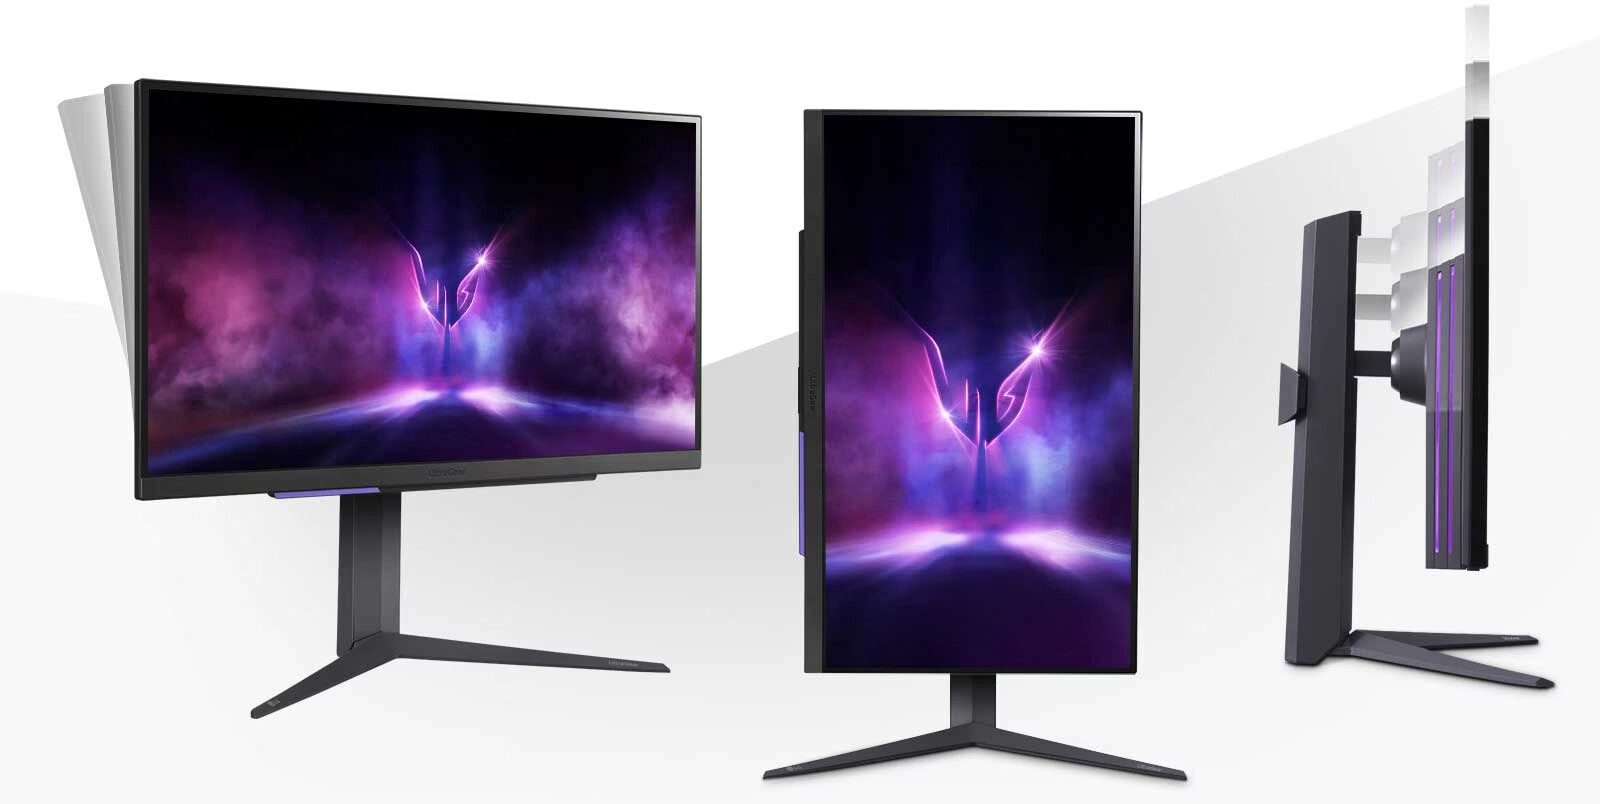 LG Sneaks Out Two 4K UltraGear Gaming Monitors